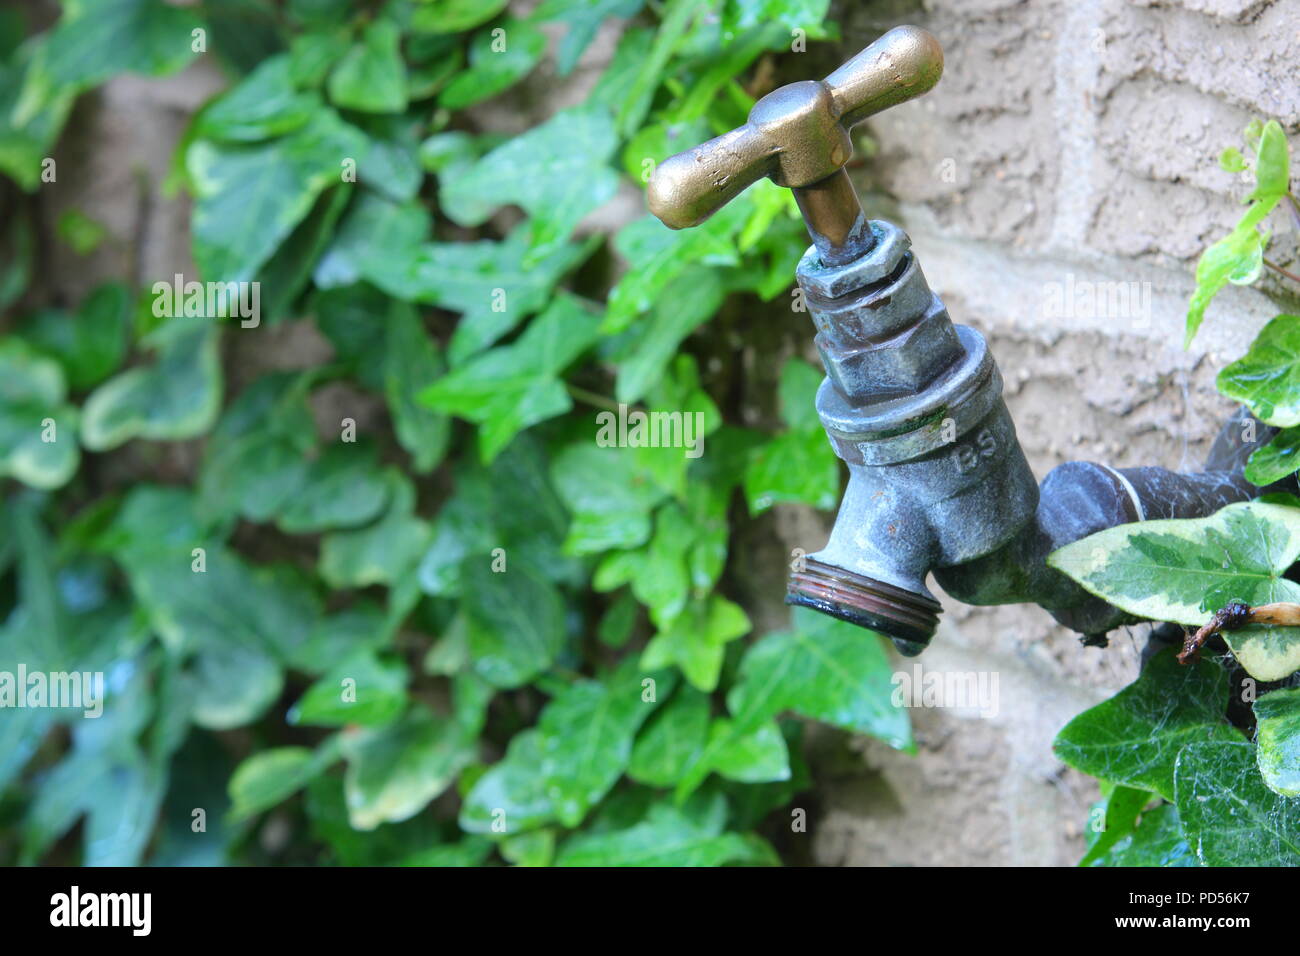 A tap which looks dry due to the heatwave and heading towards a hosepipe ban Stock Photo